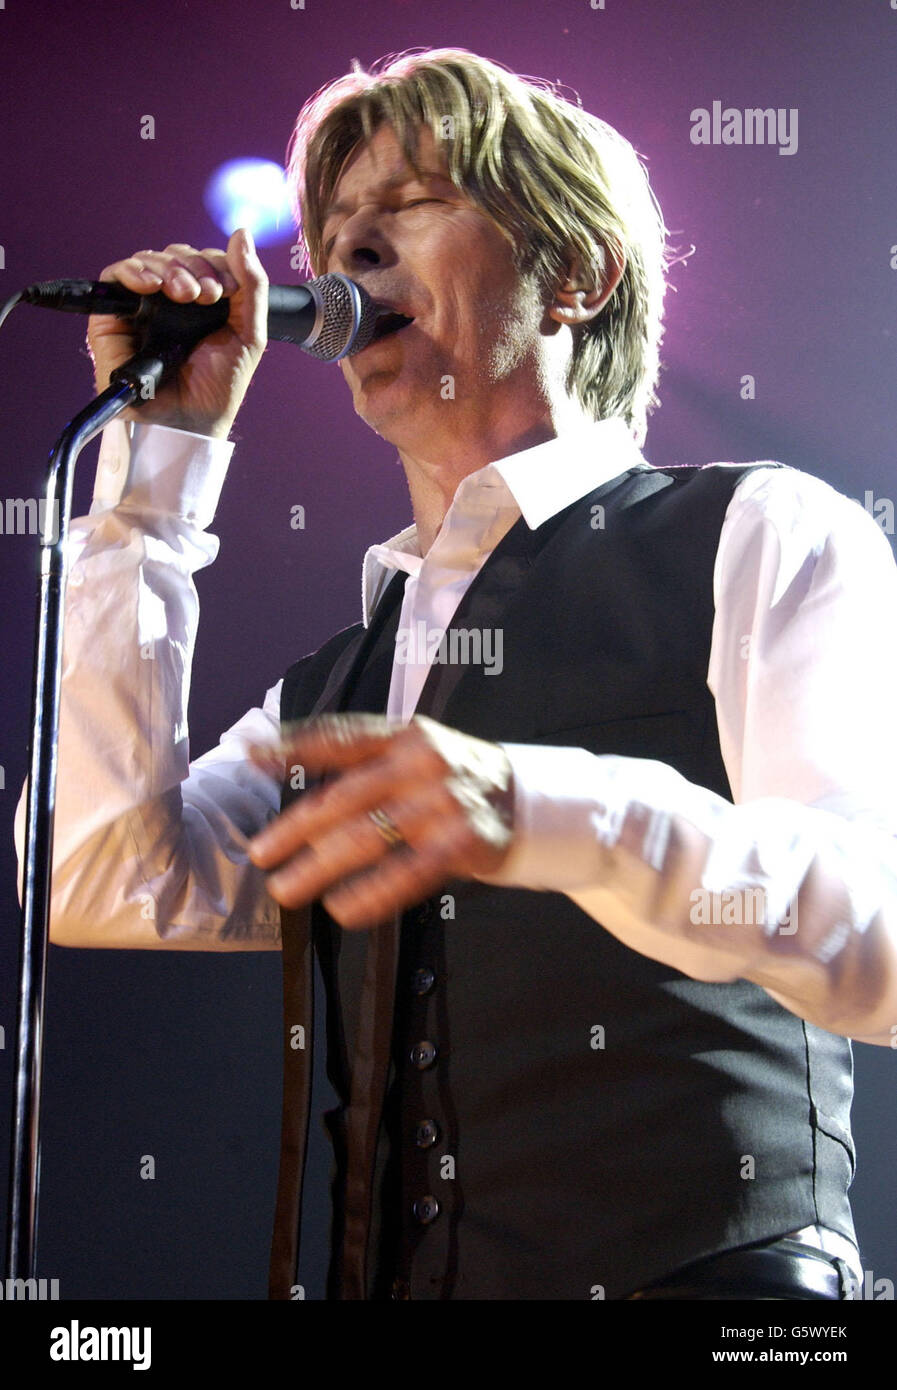 David Bowie performs material from his newly released album Heathen, during Meltdown 2002, the finale of a two-week event, at the Royal Festival Hall in London. Stock Photo